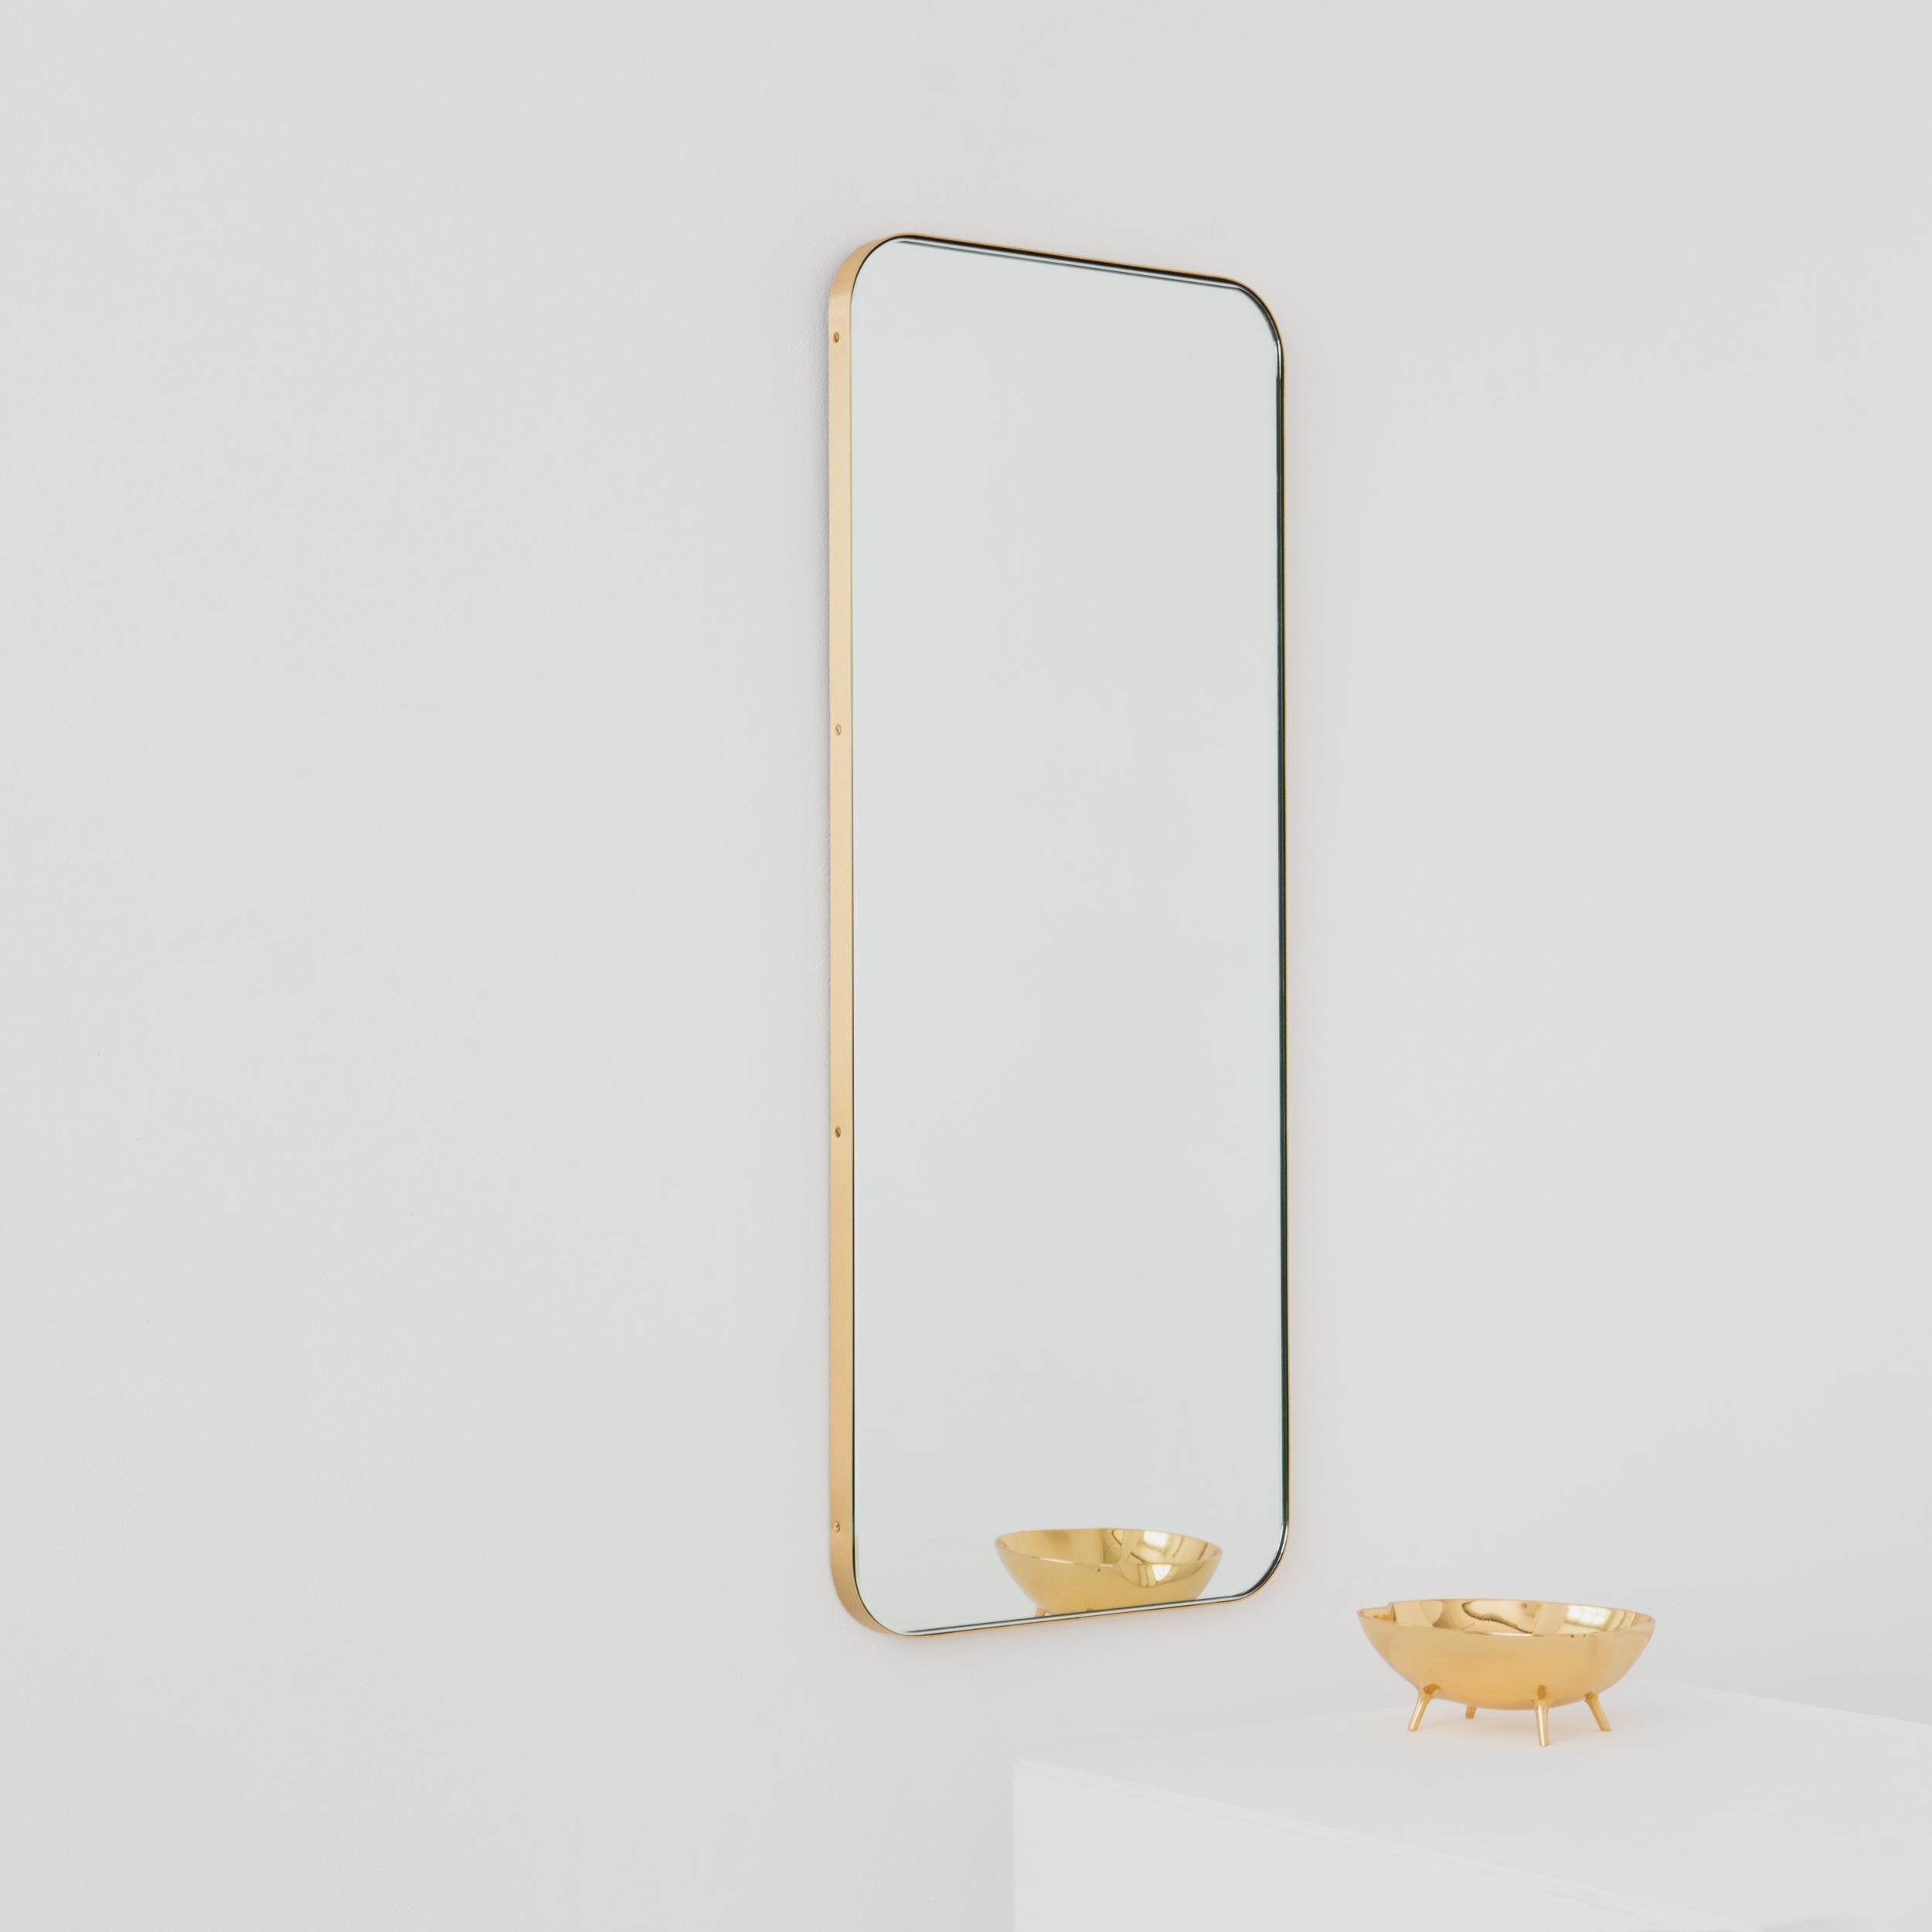 Quadris Rectangular Modern Mirror with a Brass Frame, Large In New Condition For Sale In London, GB